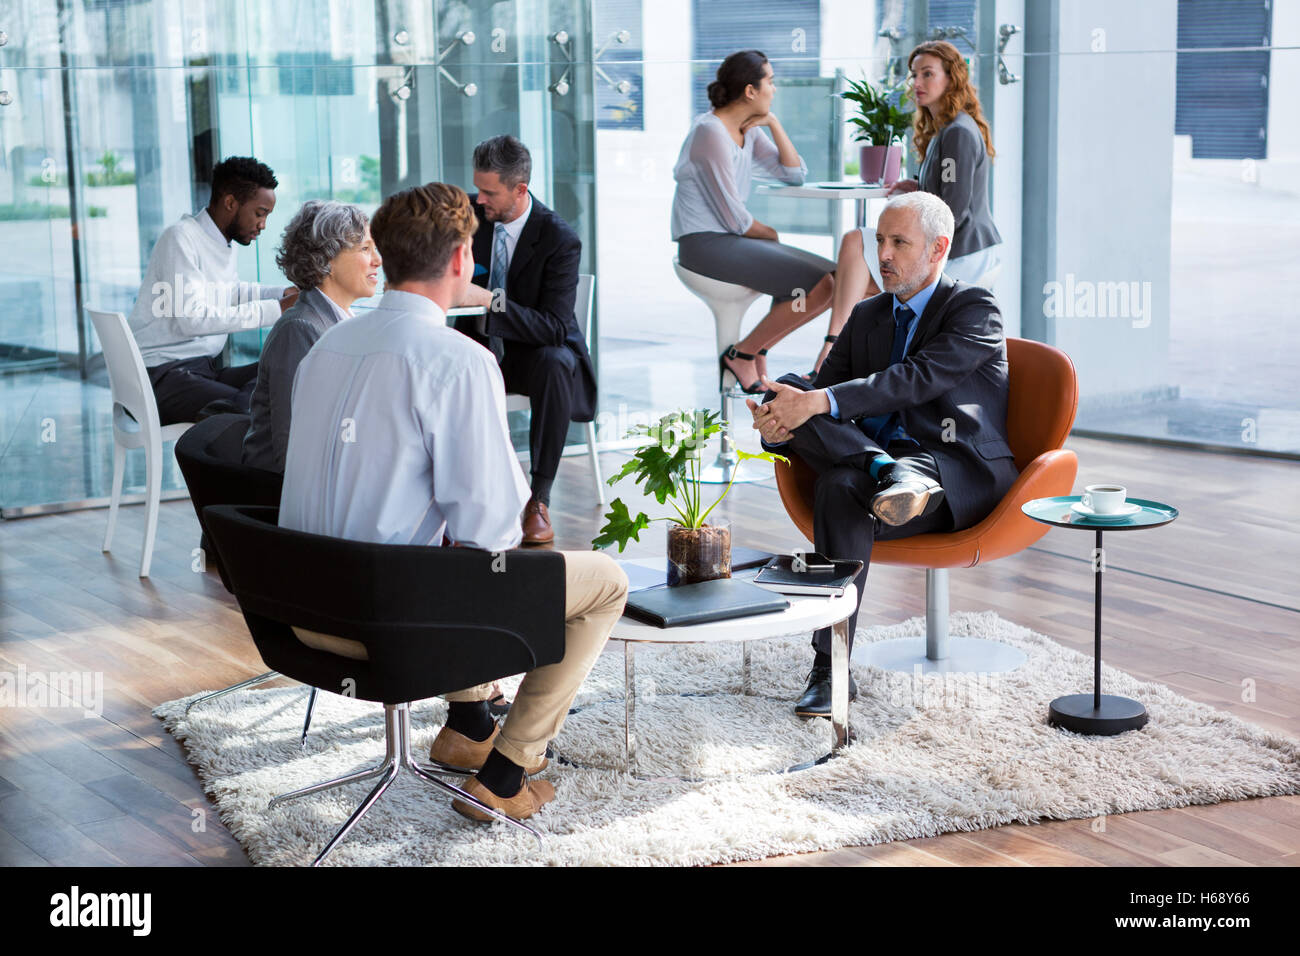 Business executive interacting with each other Stock Photo